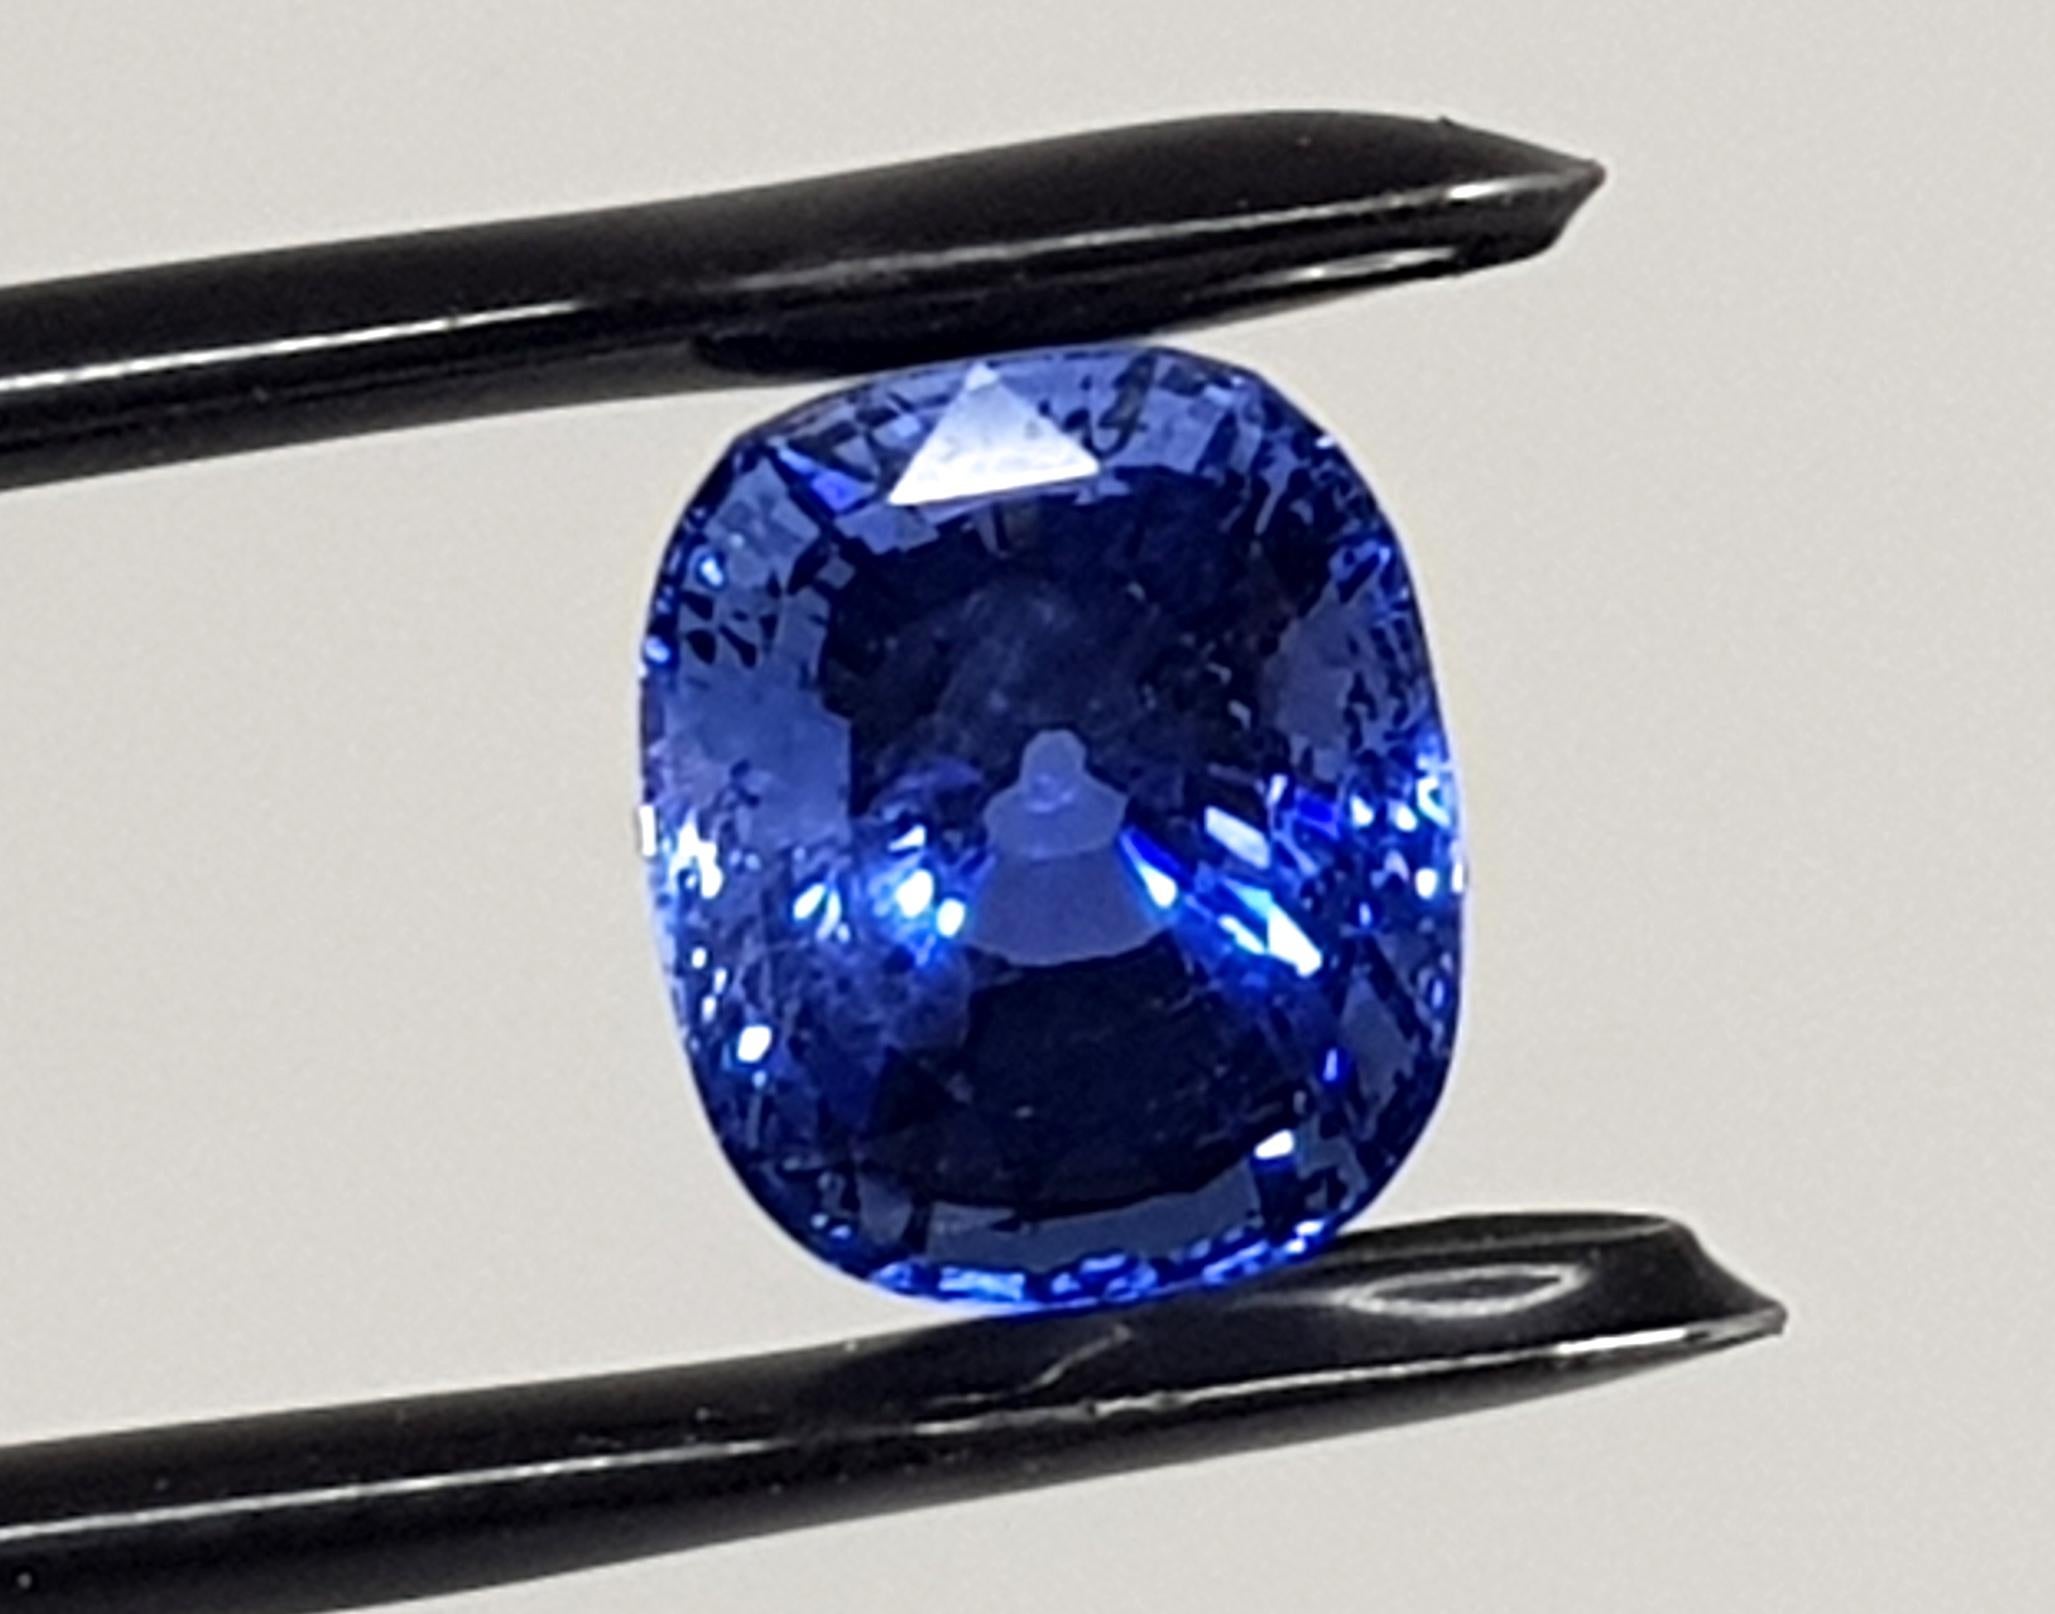 IGI Certificate number: 279790859
Weight: 9.71ct. 
Shape and Cut: Cushion Mixed Cut
Color: Deep Blue 
Good Color Quality
Transparency: Transparent
No Heat Or Treatment
Origin: Sri Lanka
Please see certificate for more details
Shipping: Free